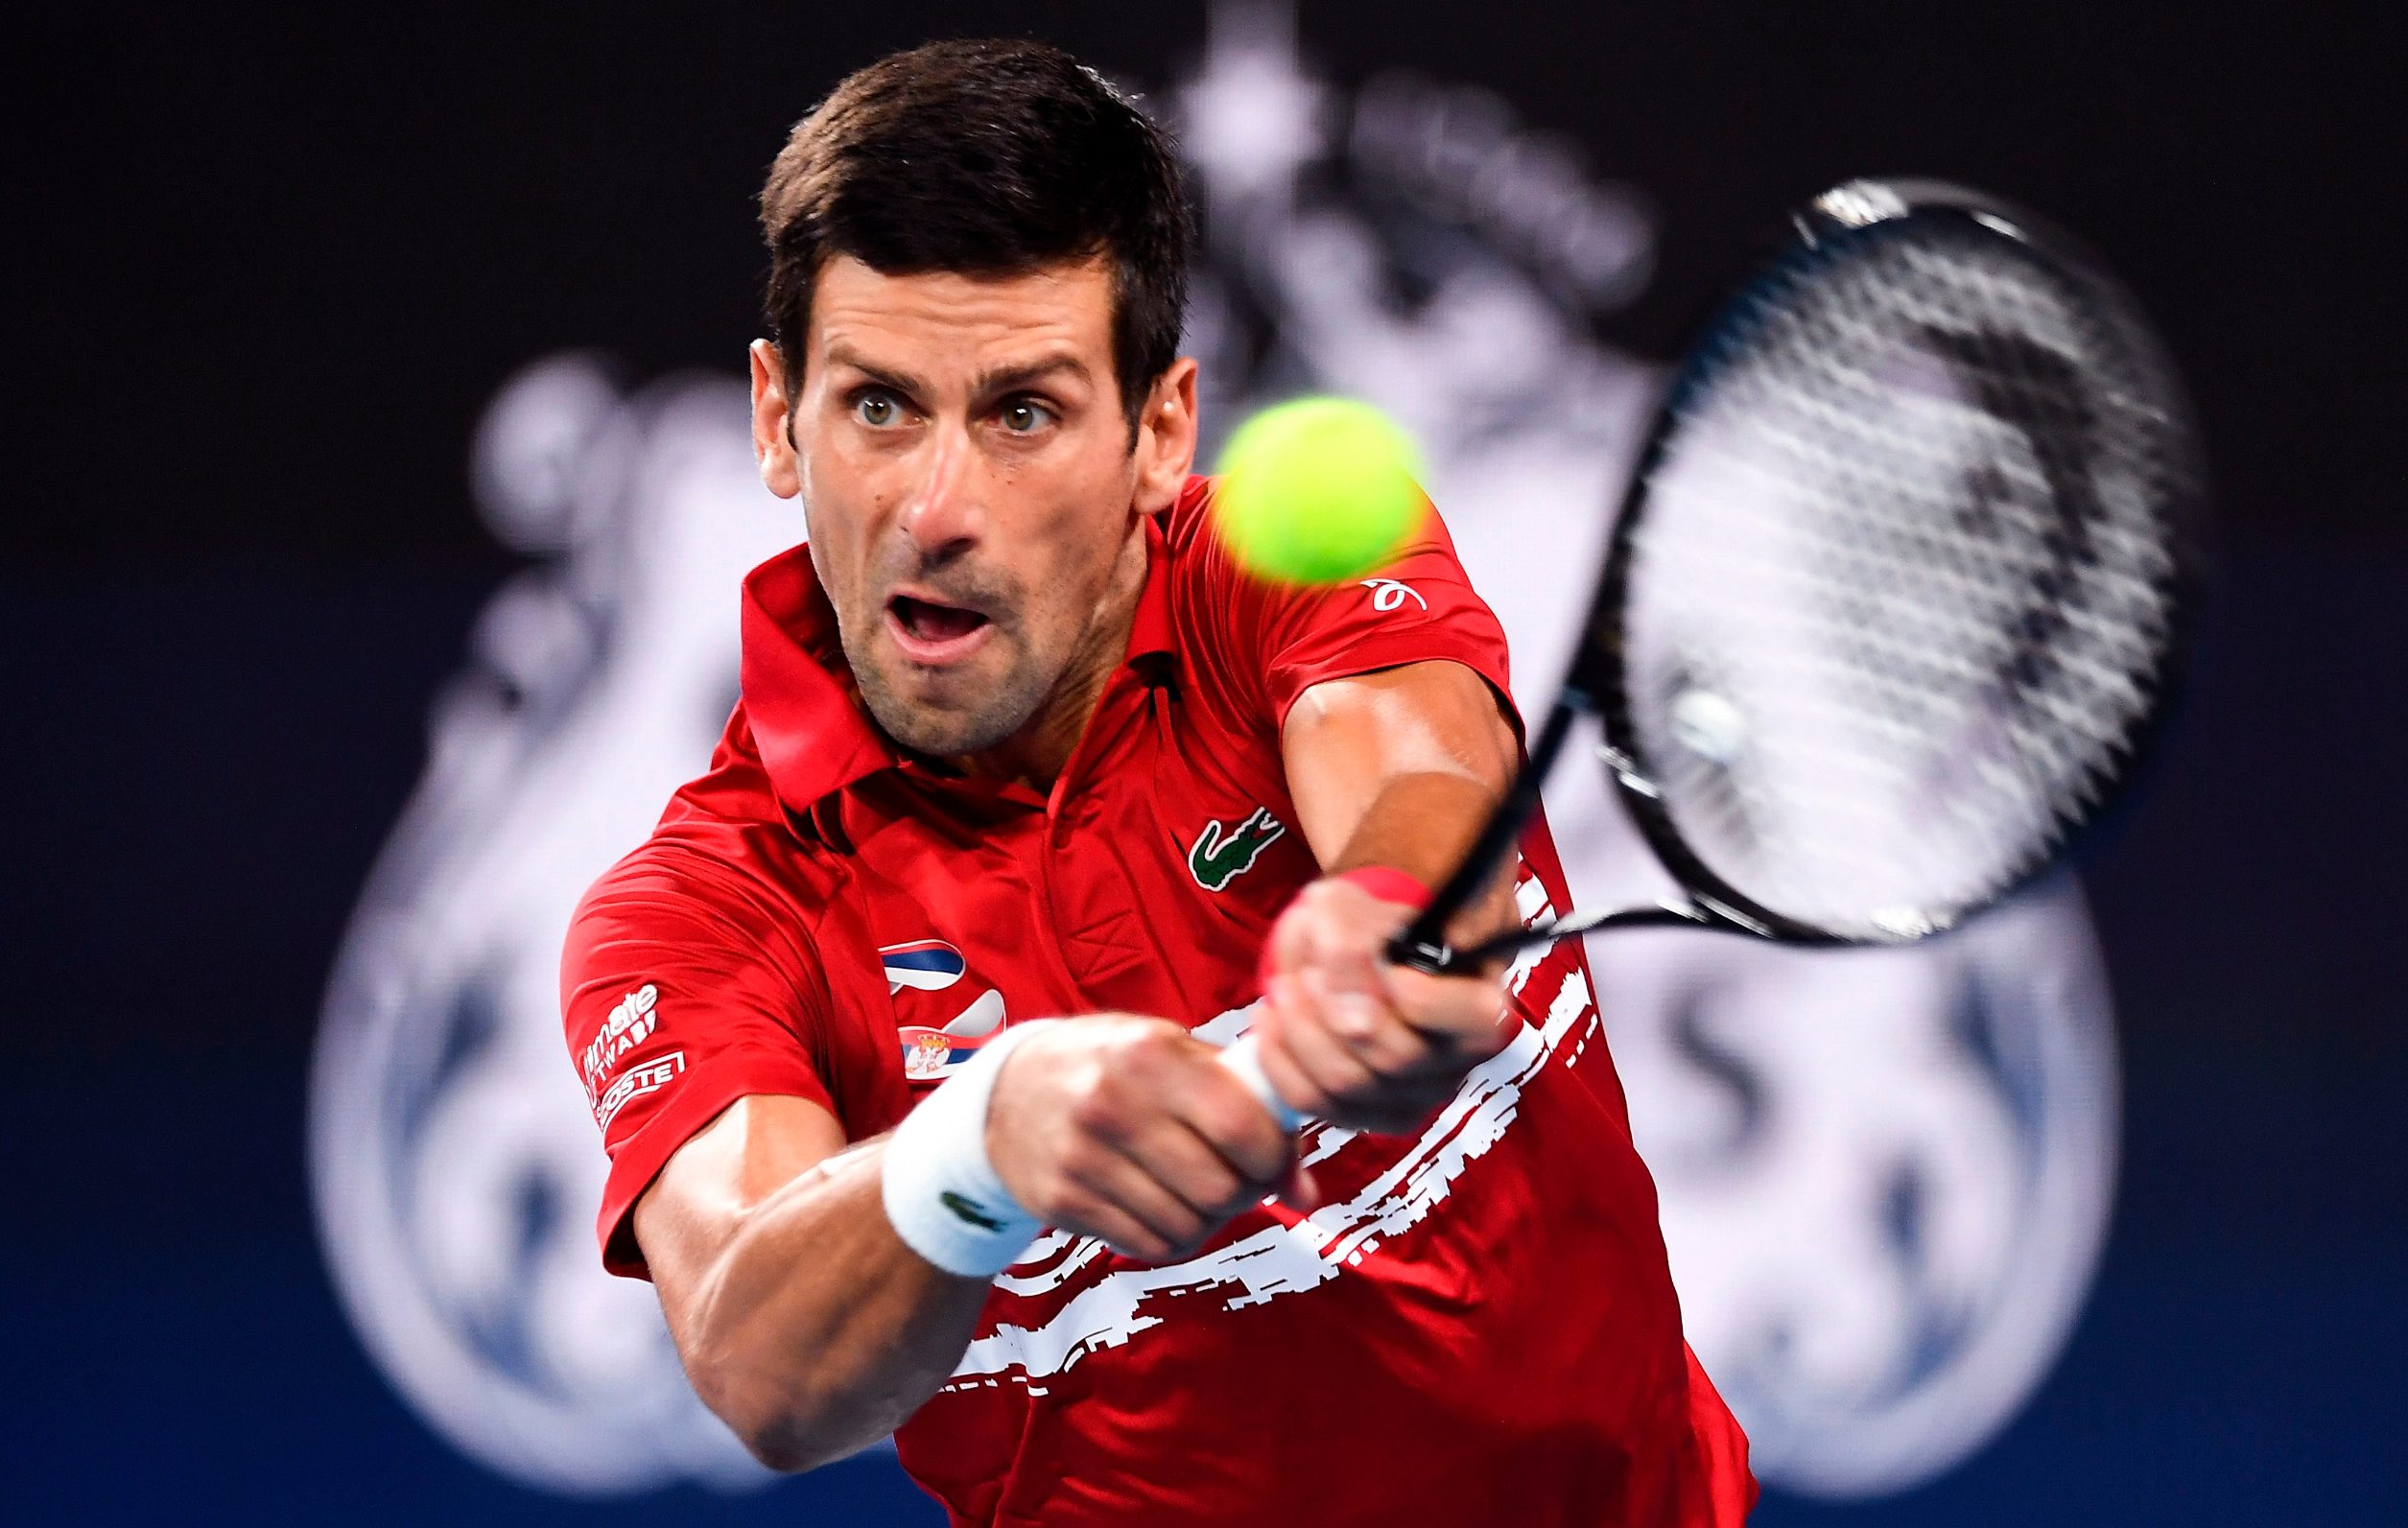 Novak Djokovic of Serbia hits a return against Rafael Nadal of Spain in their men's singles match in the final of the ATP Cup tennis tournament in Sydney on January 12, 2020. (Photo by William WEST / AFP) / -- IMAGE RESTRICTED TO EDITORIAL USE - STRICTLY NO COMMERCIAL USE --